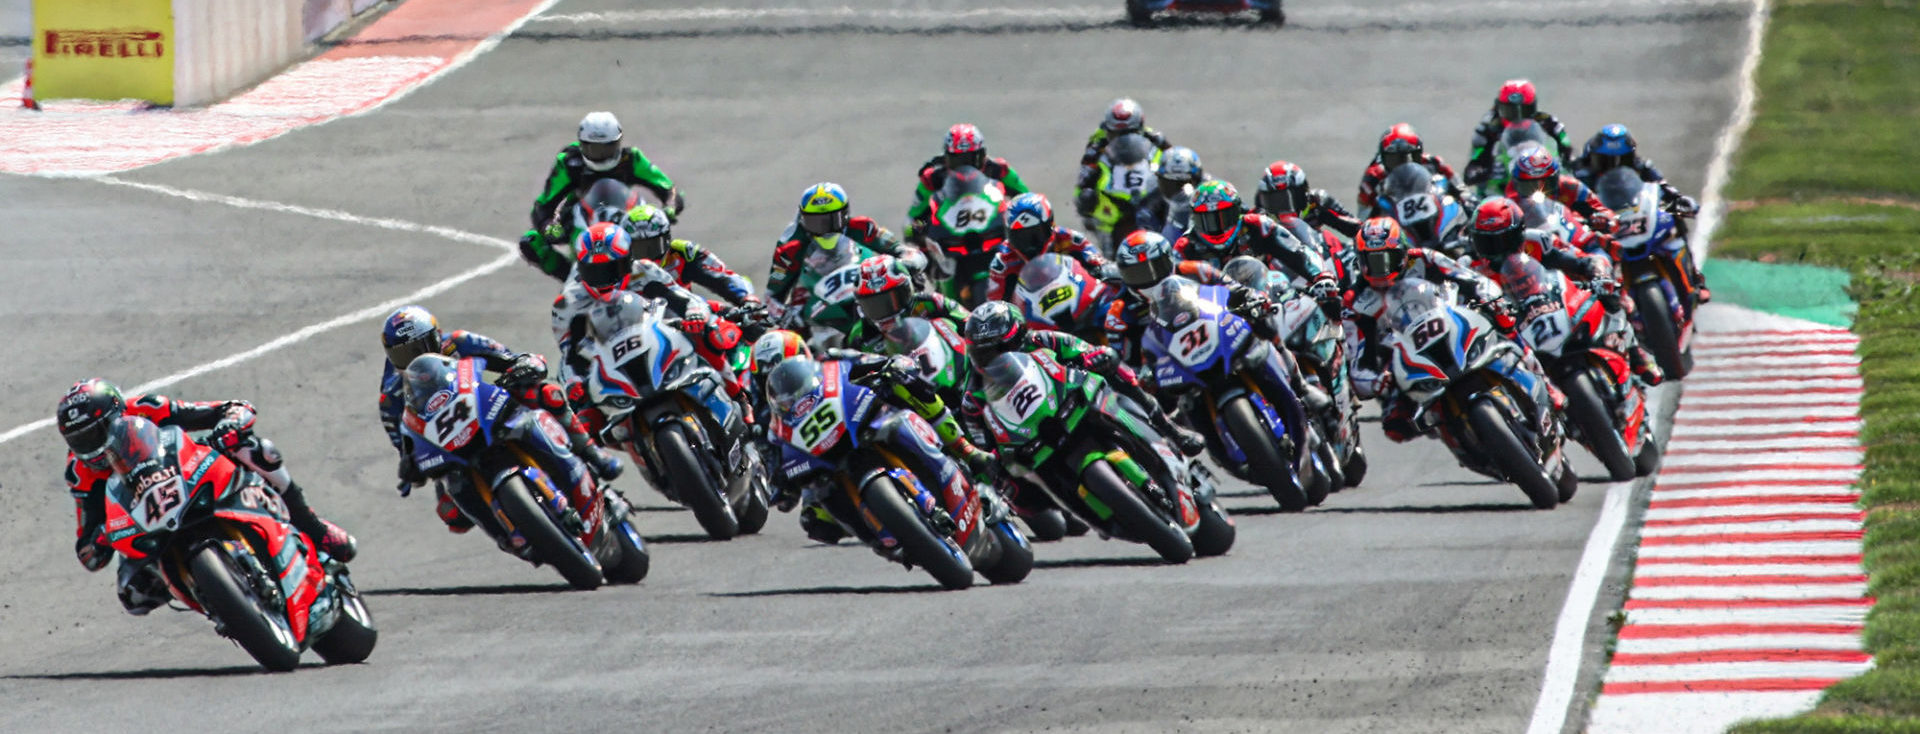 The start of a World Superbike race at the Navarra Circuit, in Spain. Photo courtesy Dorna.